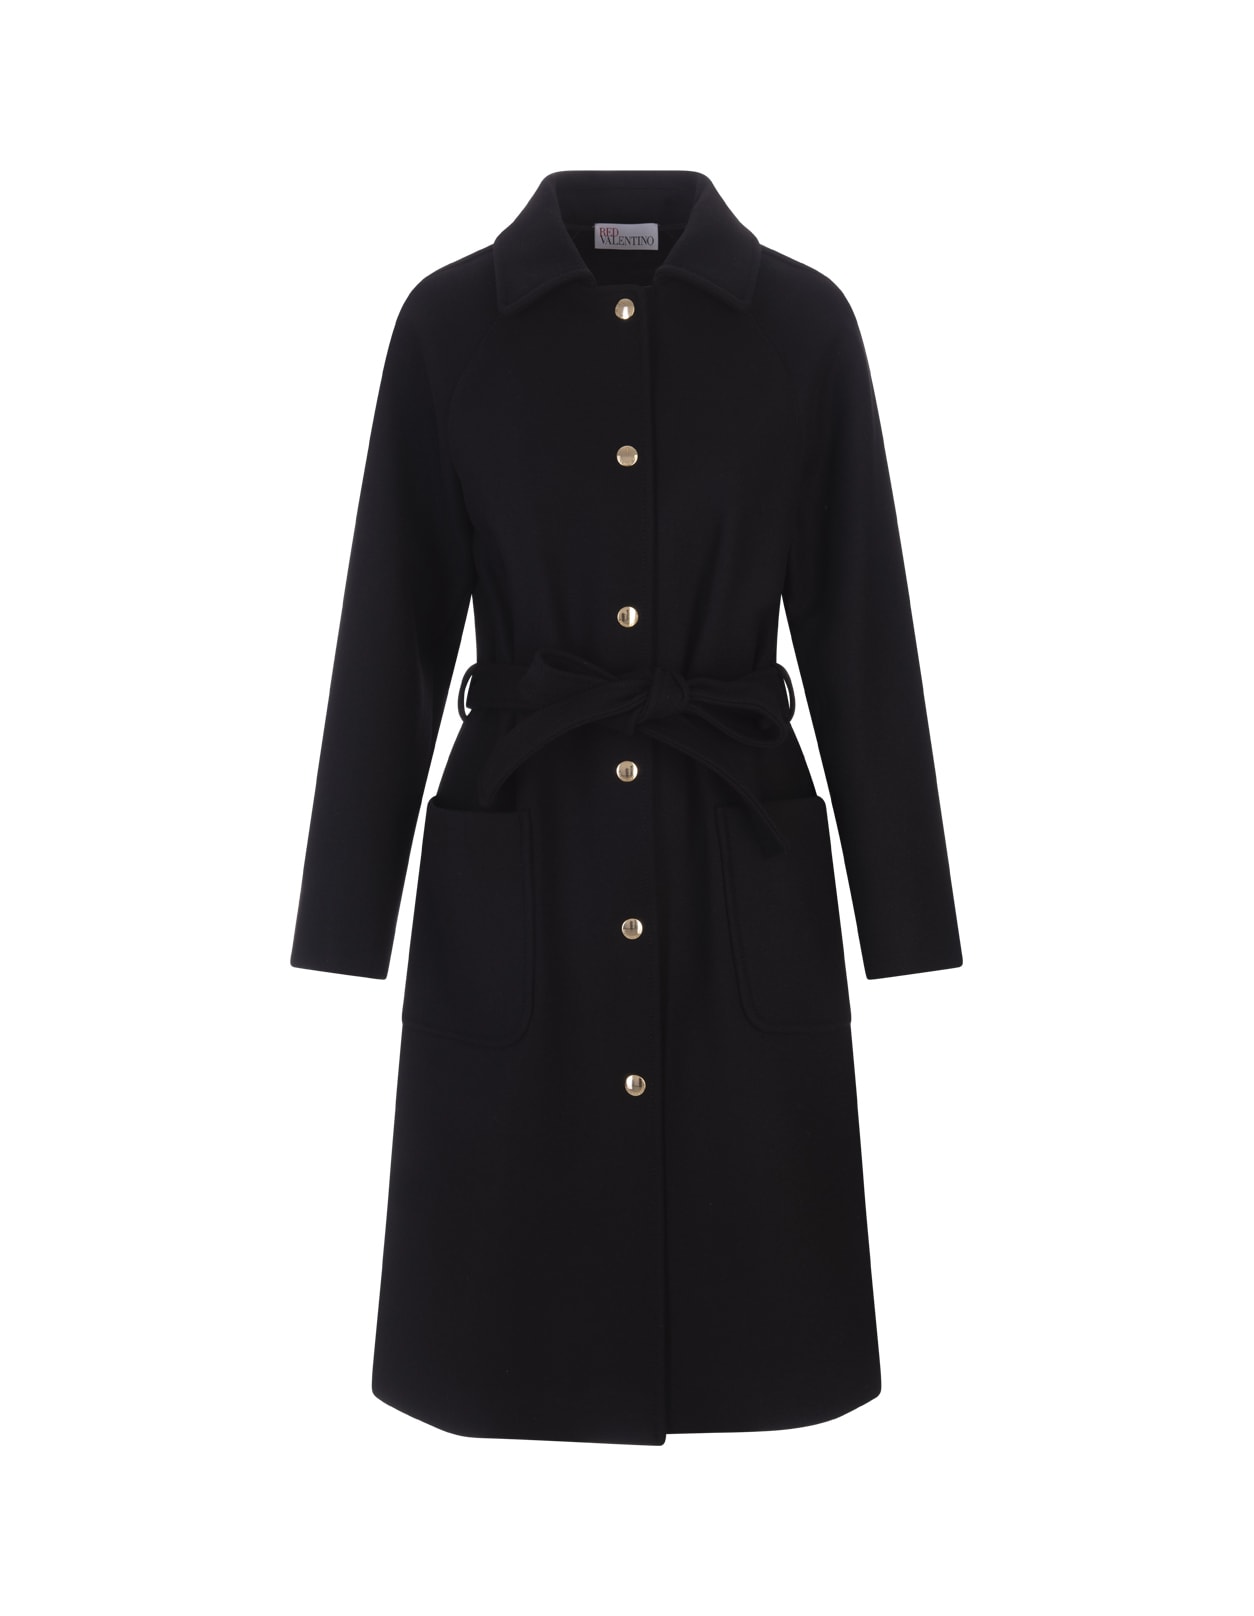 RED Valentino Woman Black Wool And Cashmere Long Coat